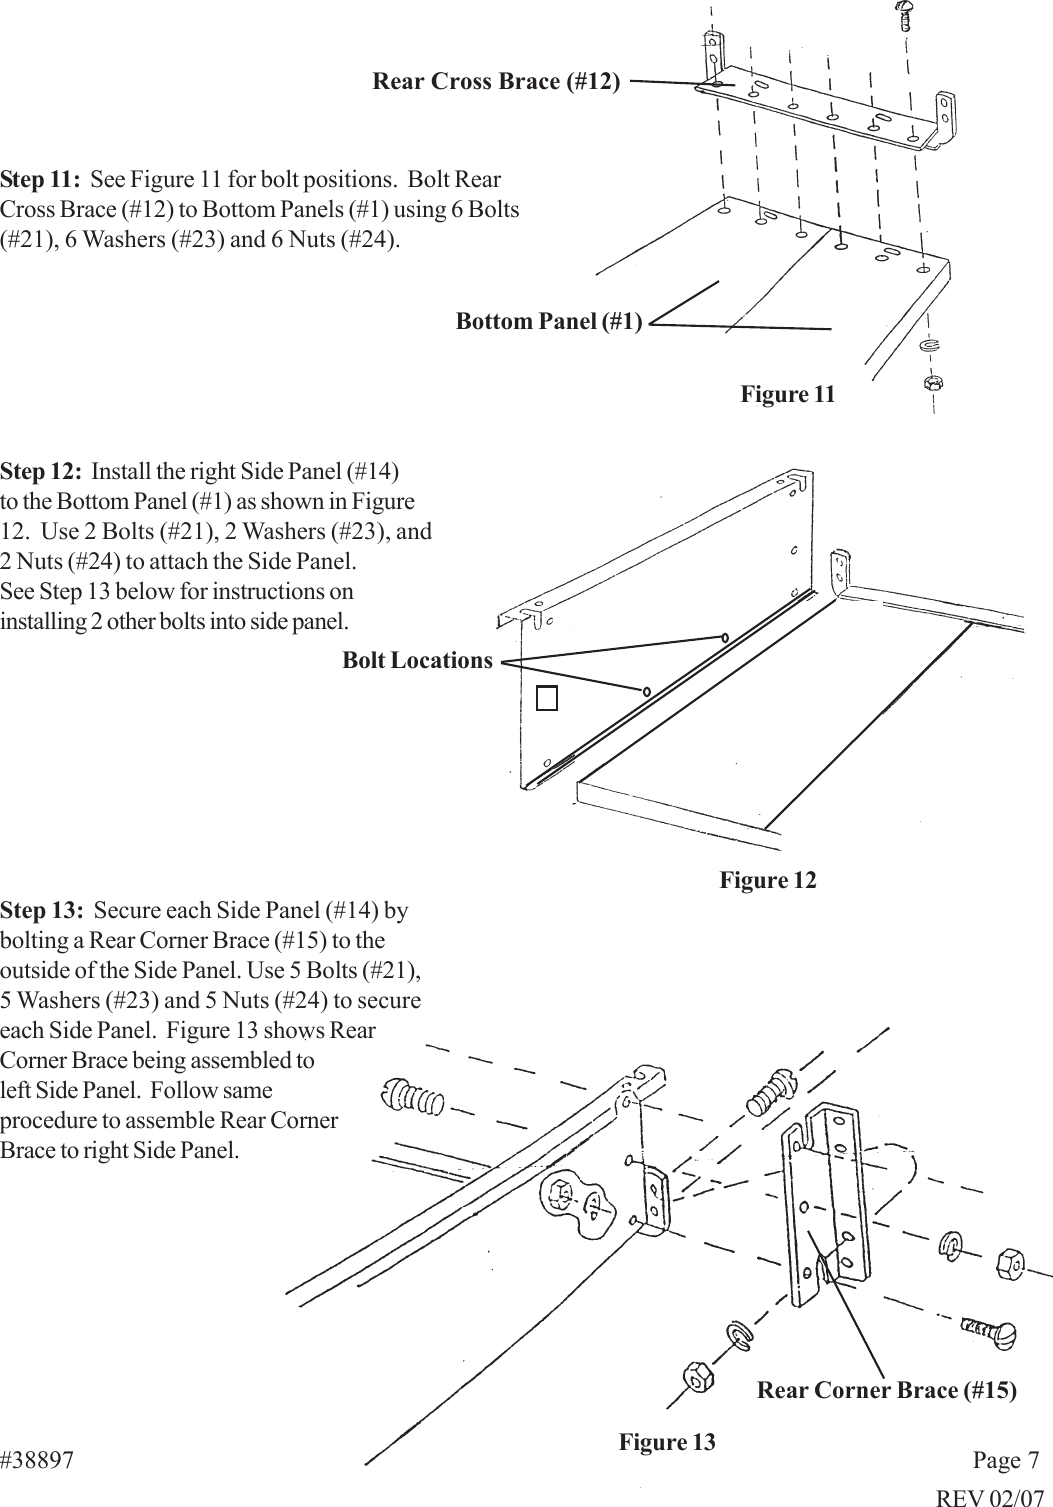 Page 7 of 9 - Harbor-Freight Harbor-Freight-10-Cubic-Ft-Heavy-Duty-Trailer-Cart-Product-Manual- 38897 Trailer Cart Manual  Harbor-freight-10-cubic-ft-heavy-duty-trailer-cart-product-manual